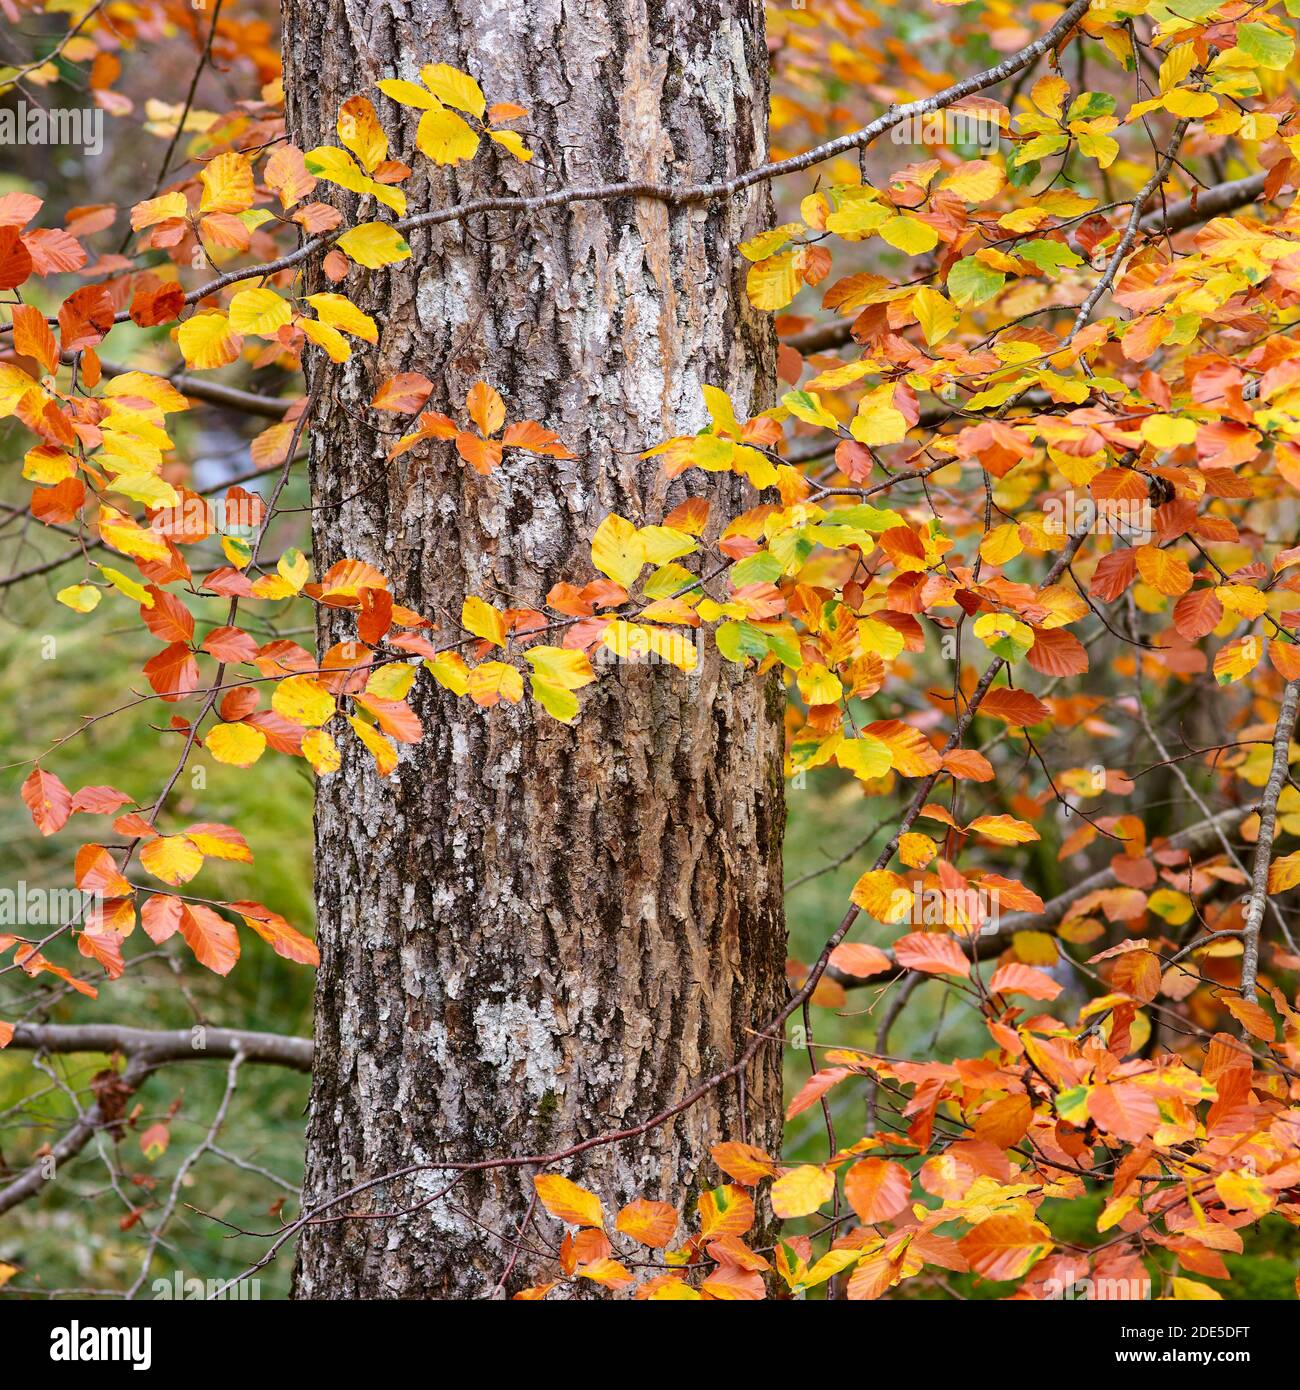 Trunk and leaves of a beech tree in autumn colours, Glen Lyon, Perth and Kinross, Scotland. Stock Photo